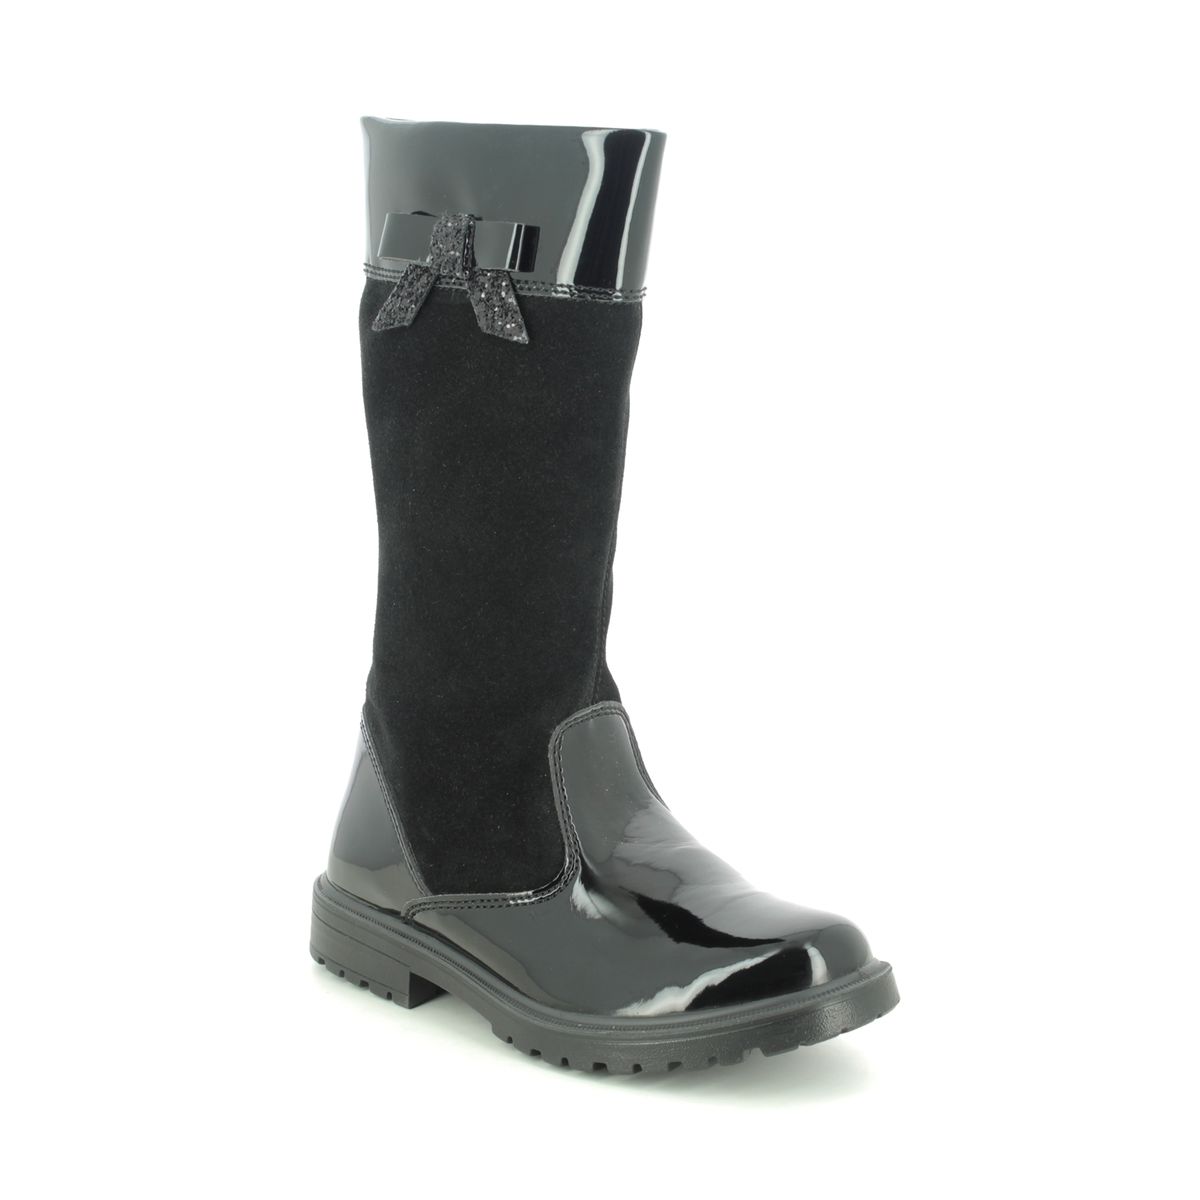 Primigi Chris Long Black patent suede Kids Girls boots 6366900-30 in a Plain Leather in Size 36